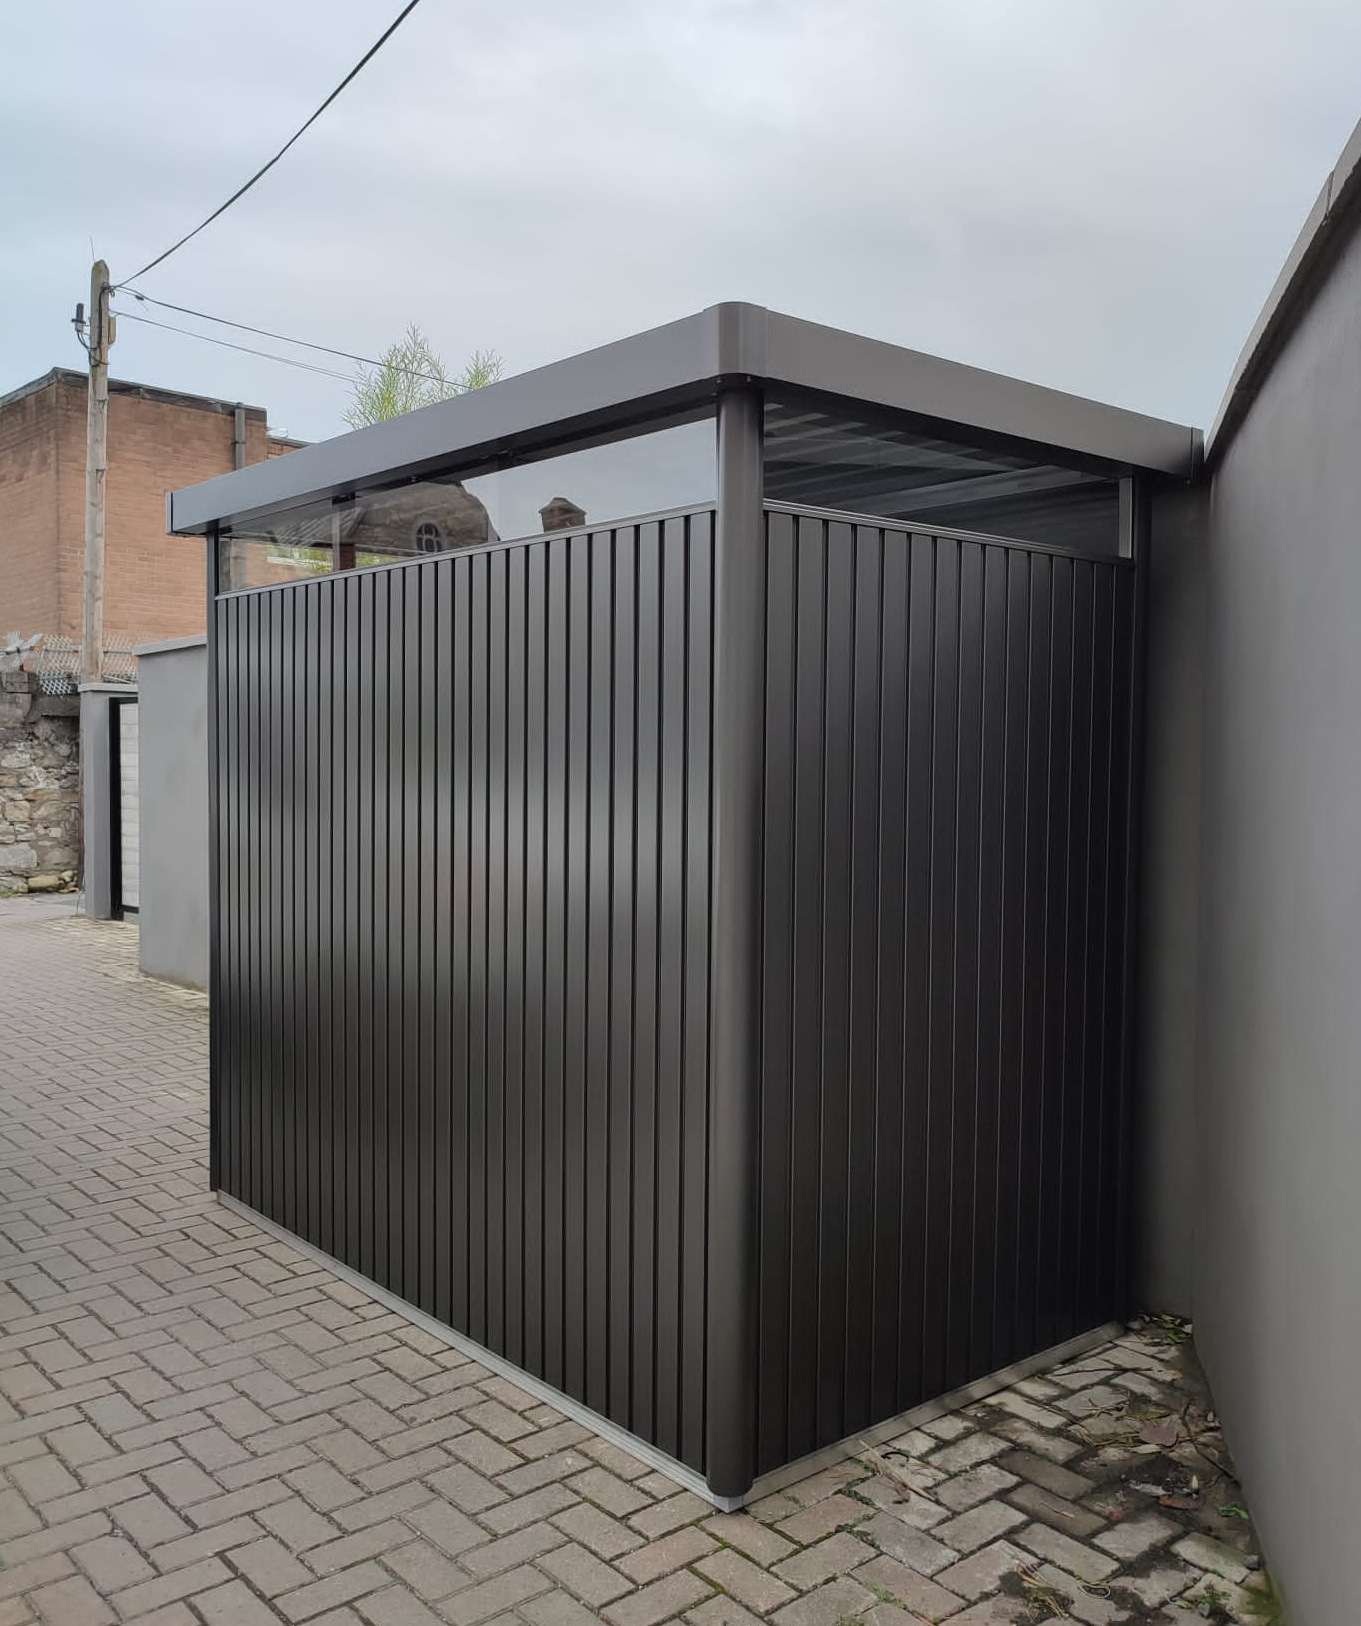 Biohort HighLine HS Garden Shed - supplied + fitted in Dun Laoghaire, Co Dublin | Owen Chubb Garden Landscapers